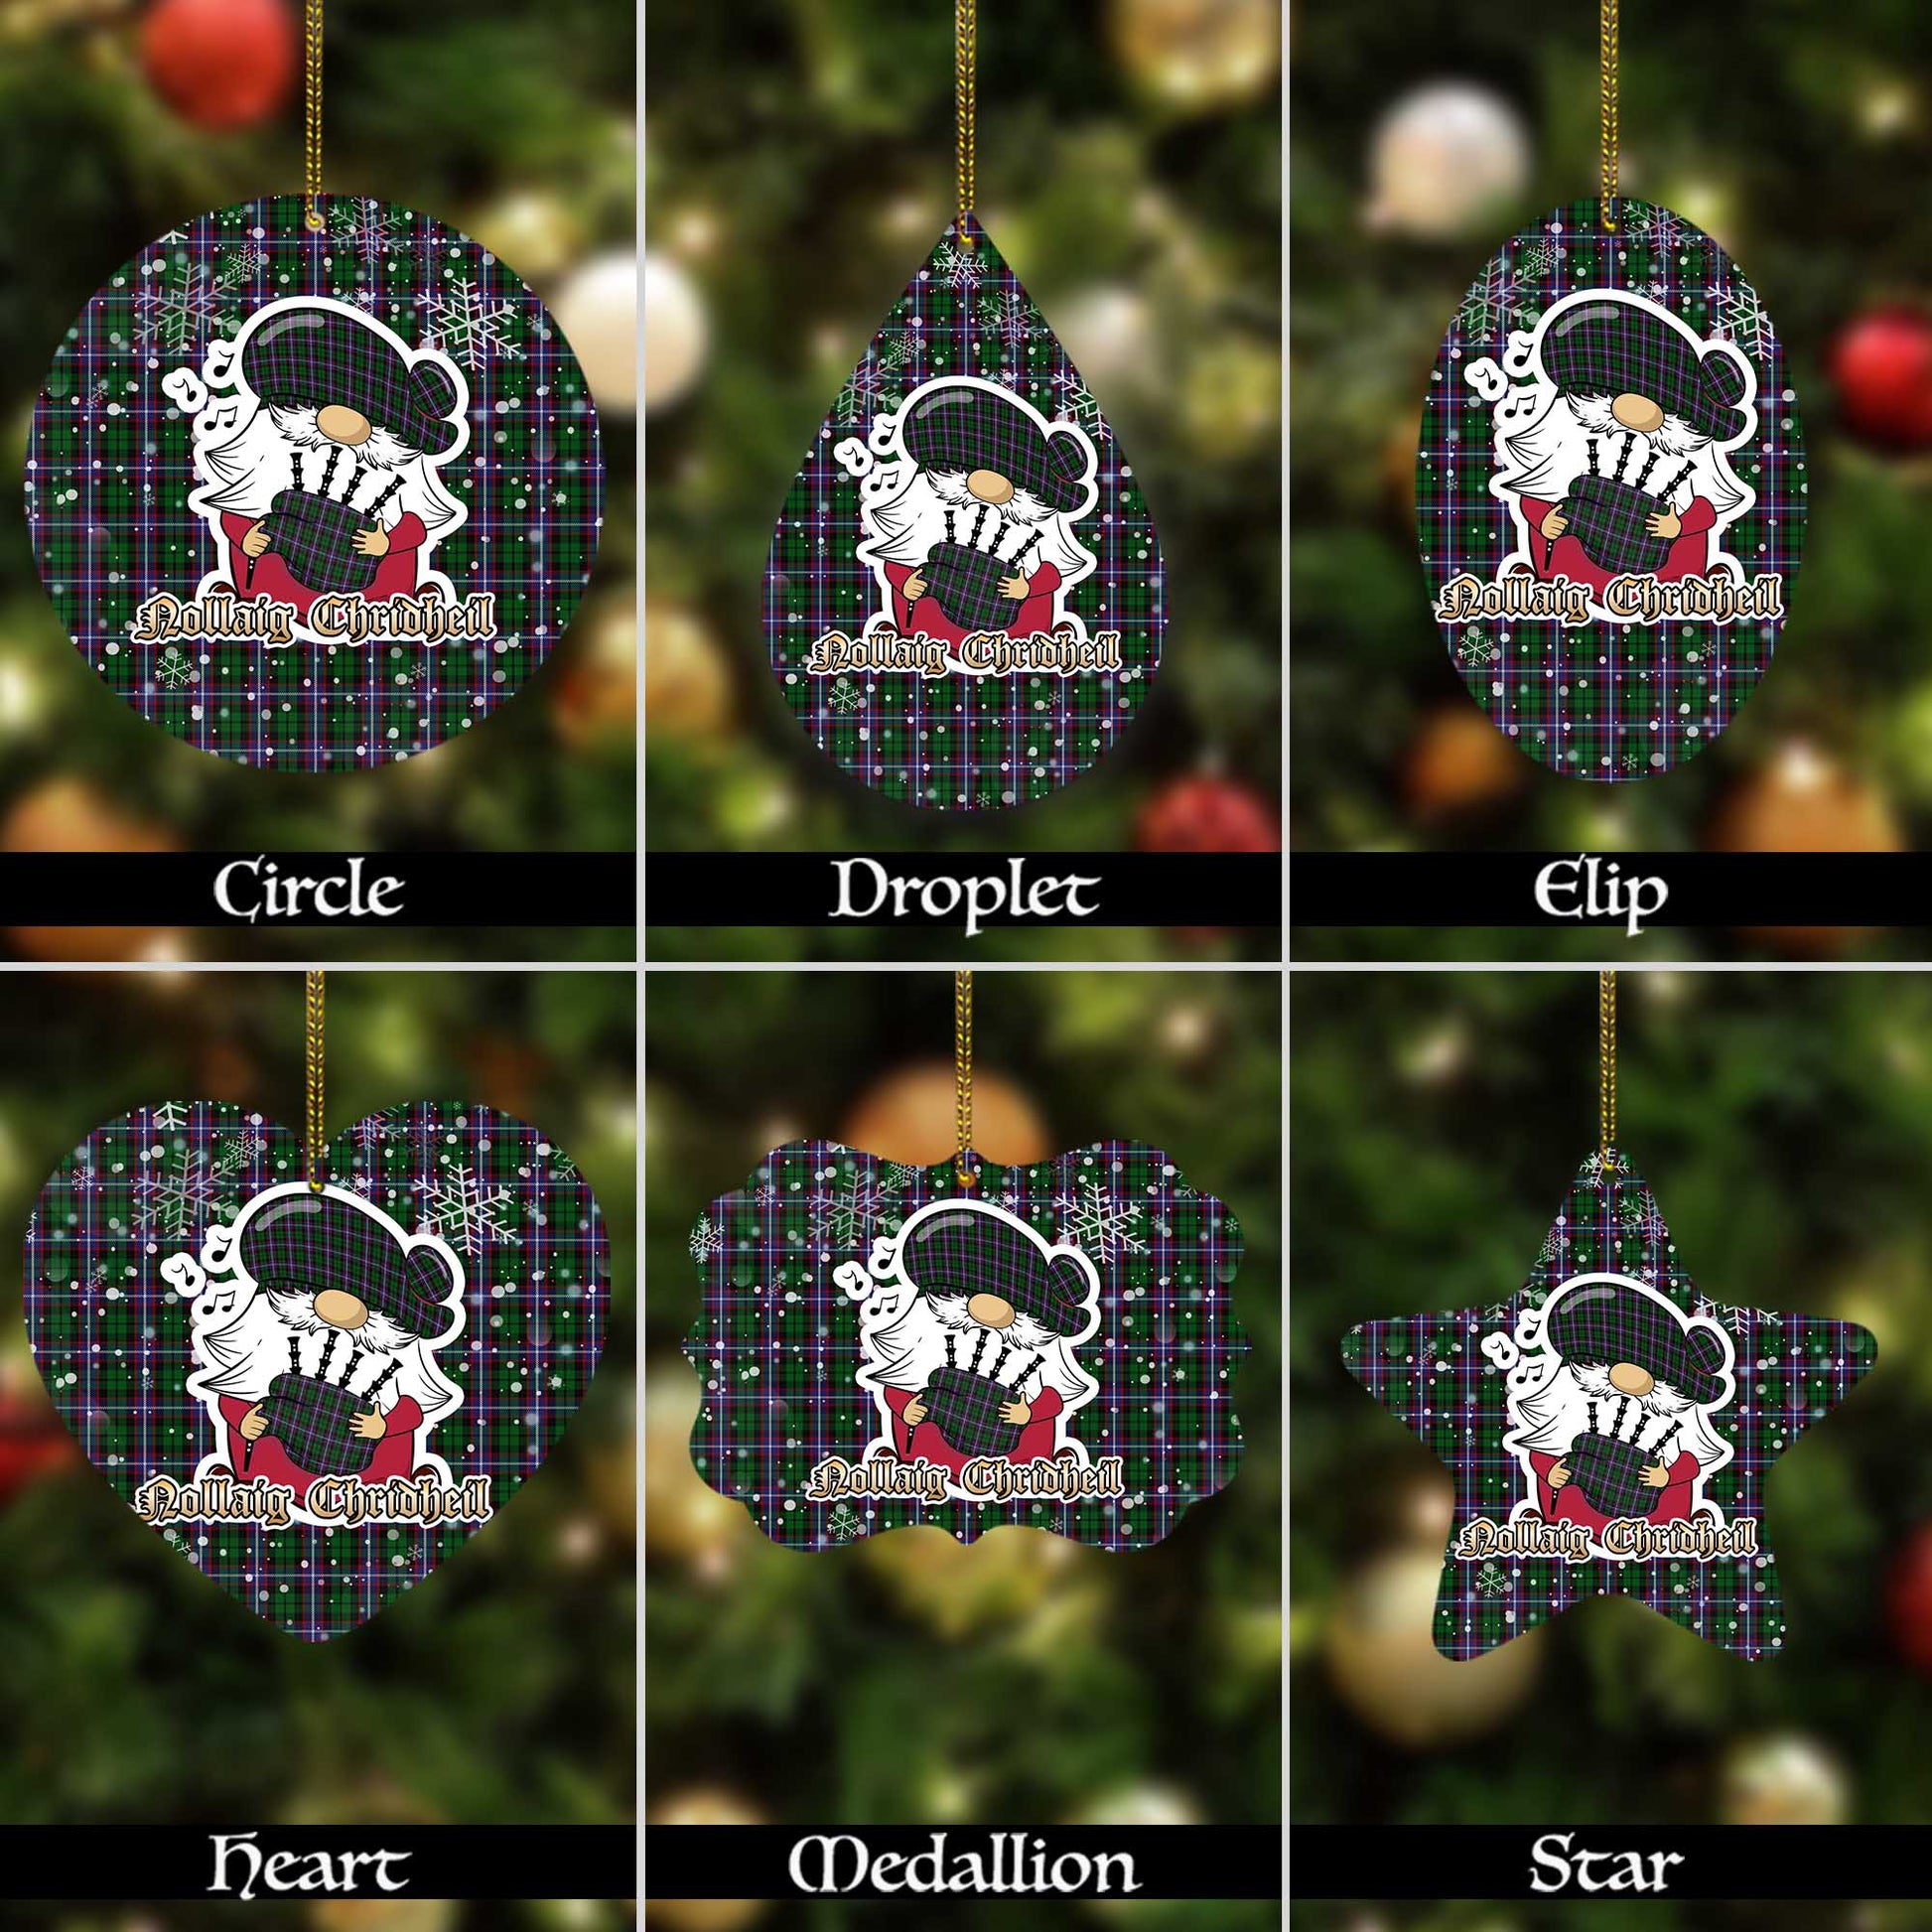 russell-tartan-christmas-ornaments-with-scottish-gnome-playing-bagpipes